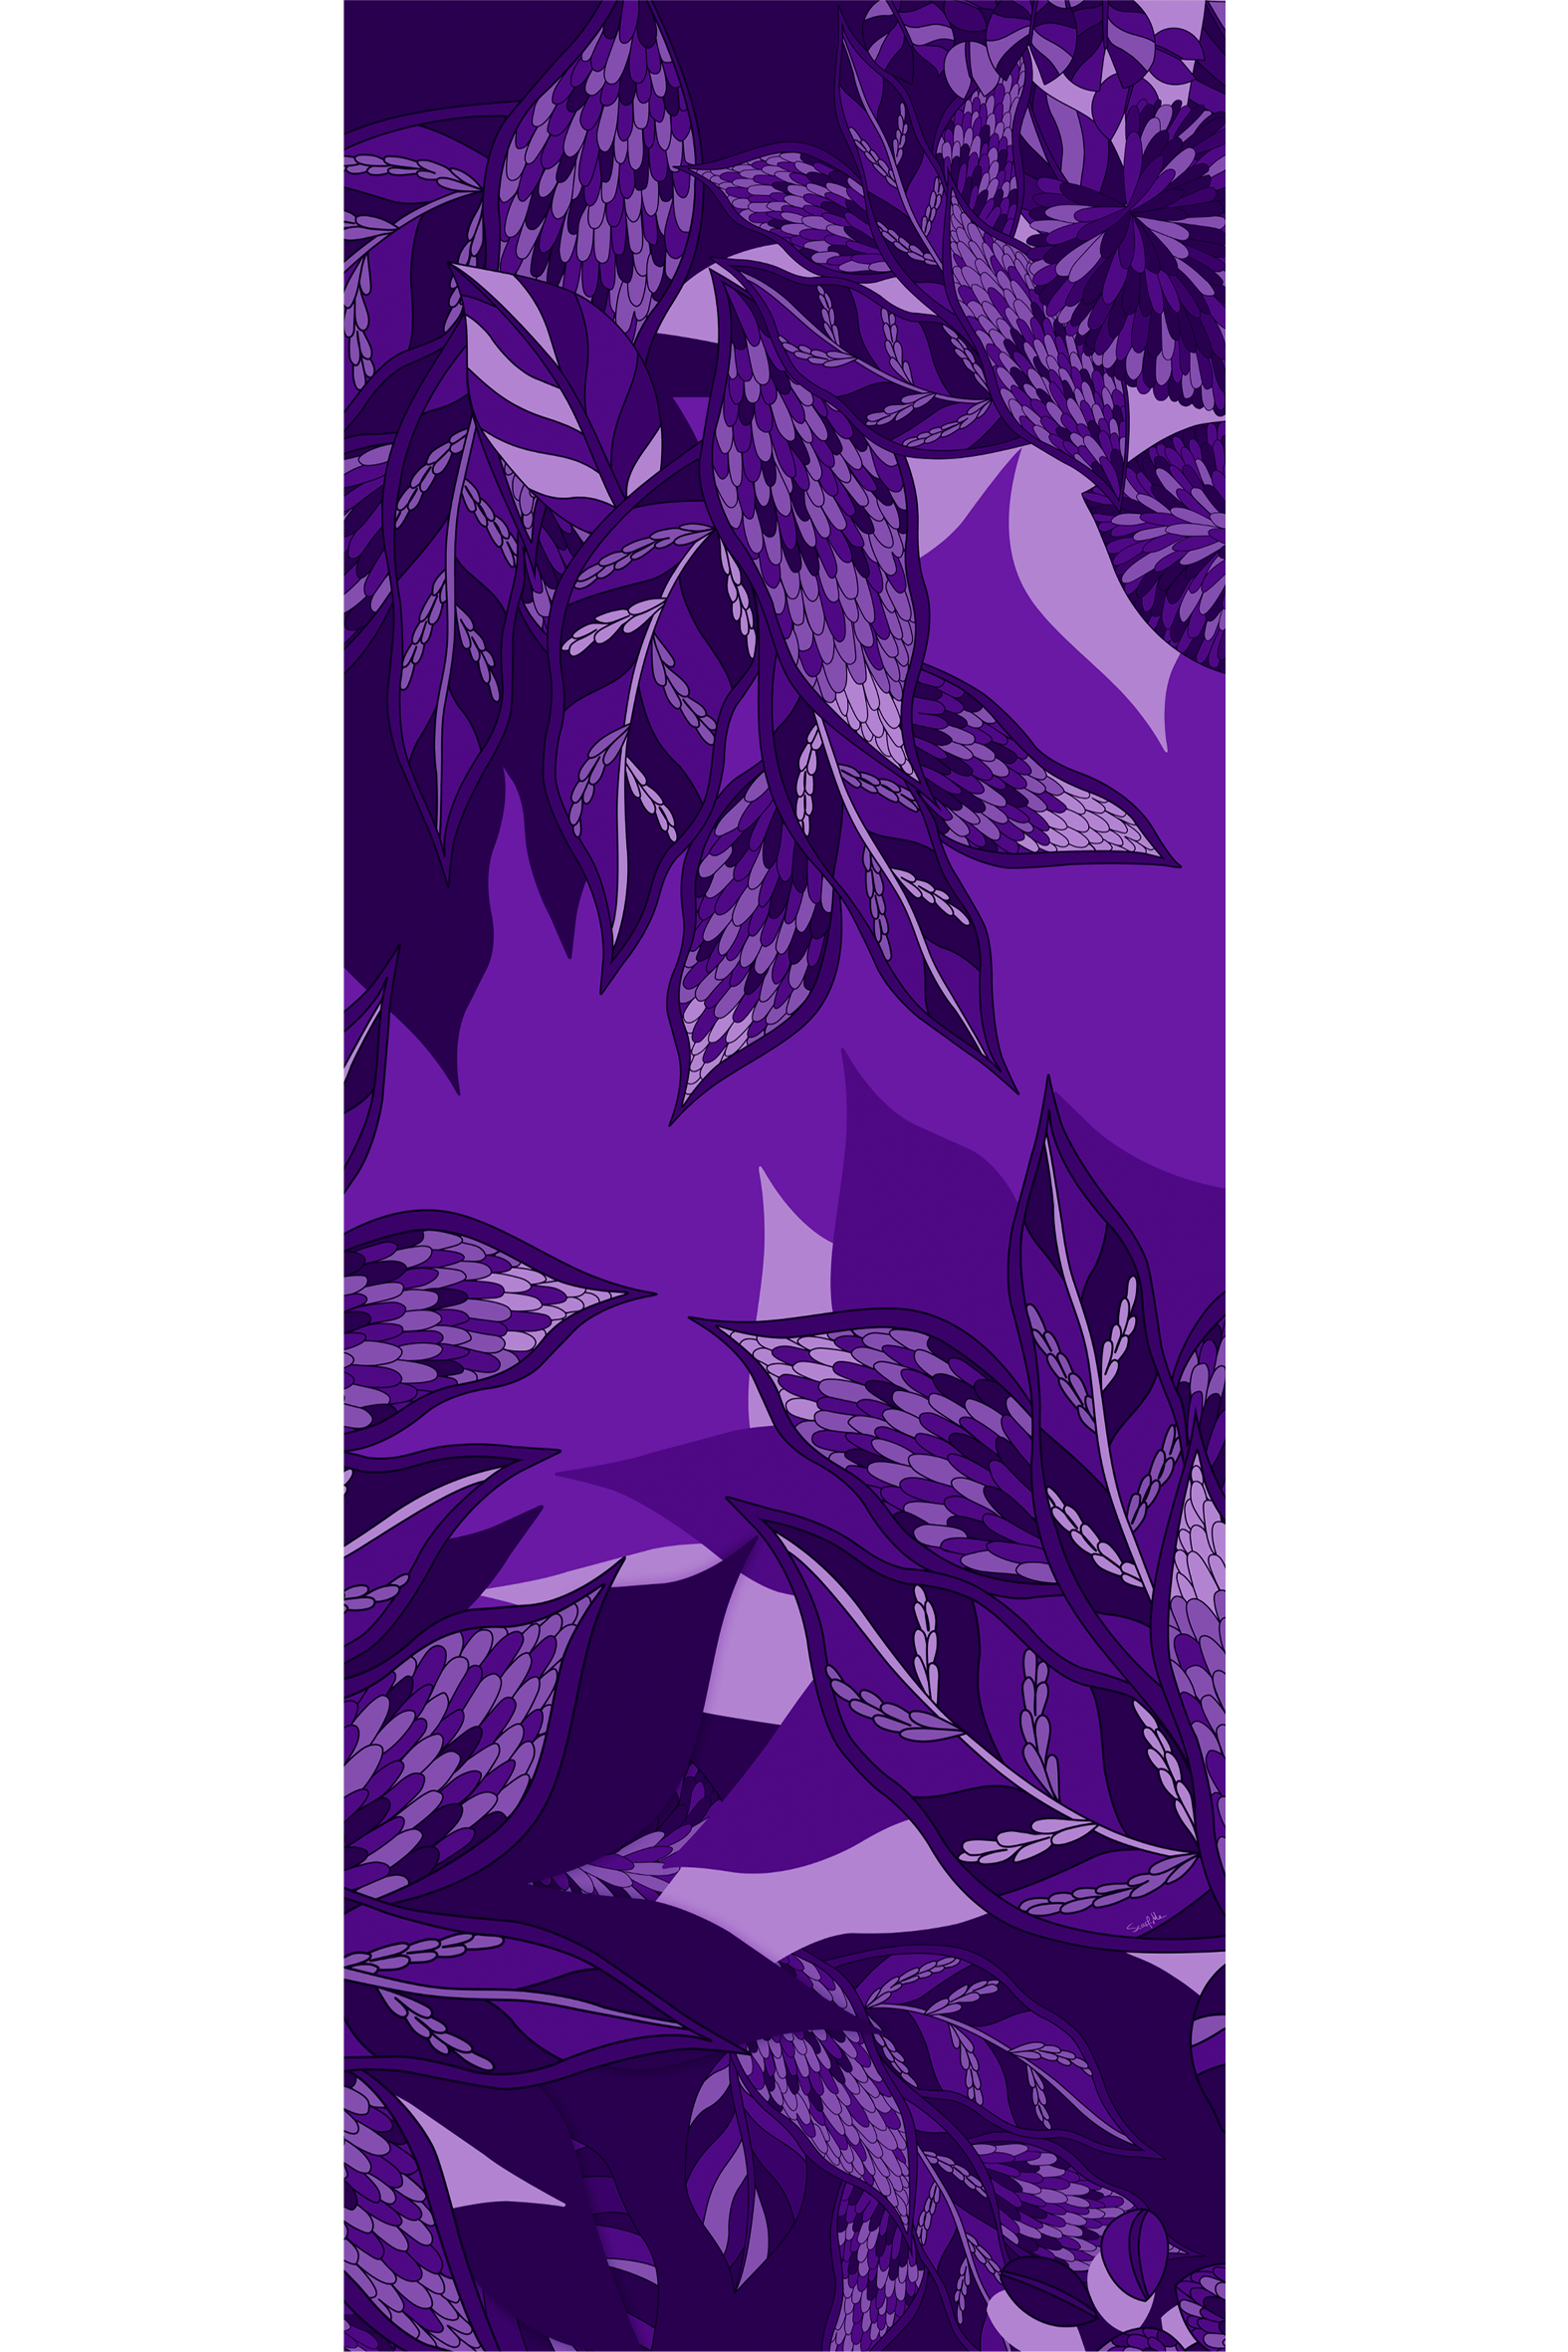 Cashmere Baby print purple branches